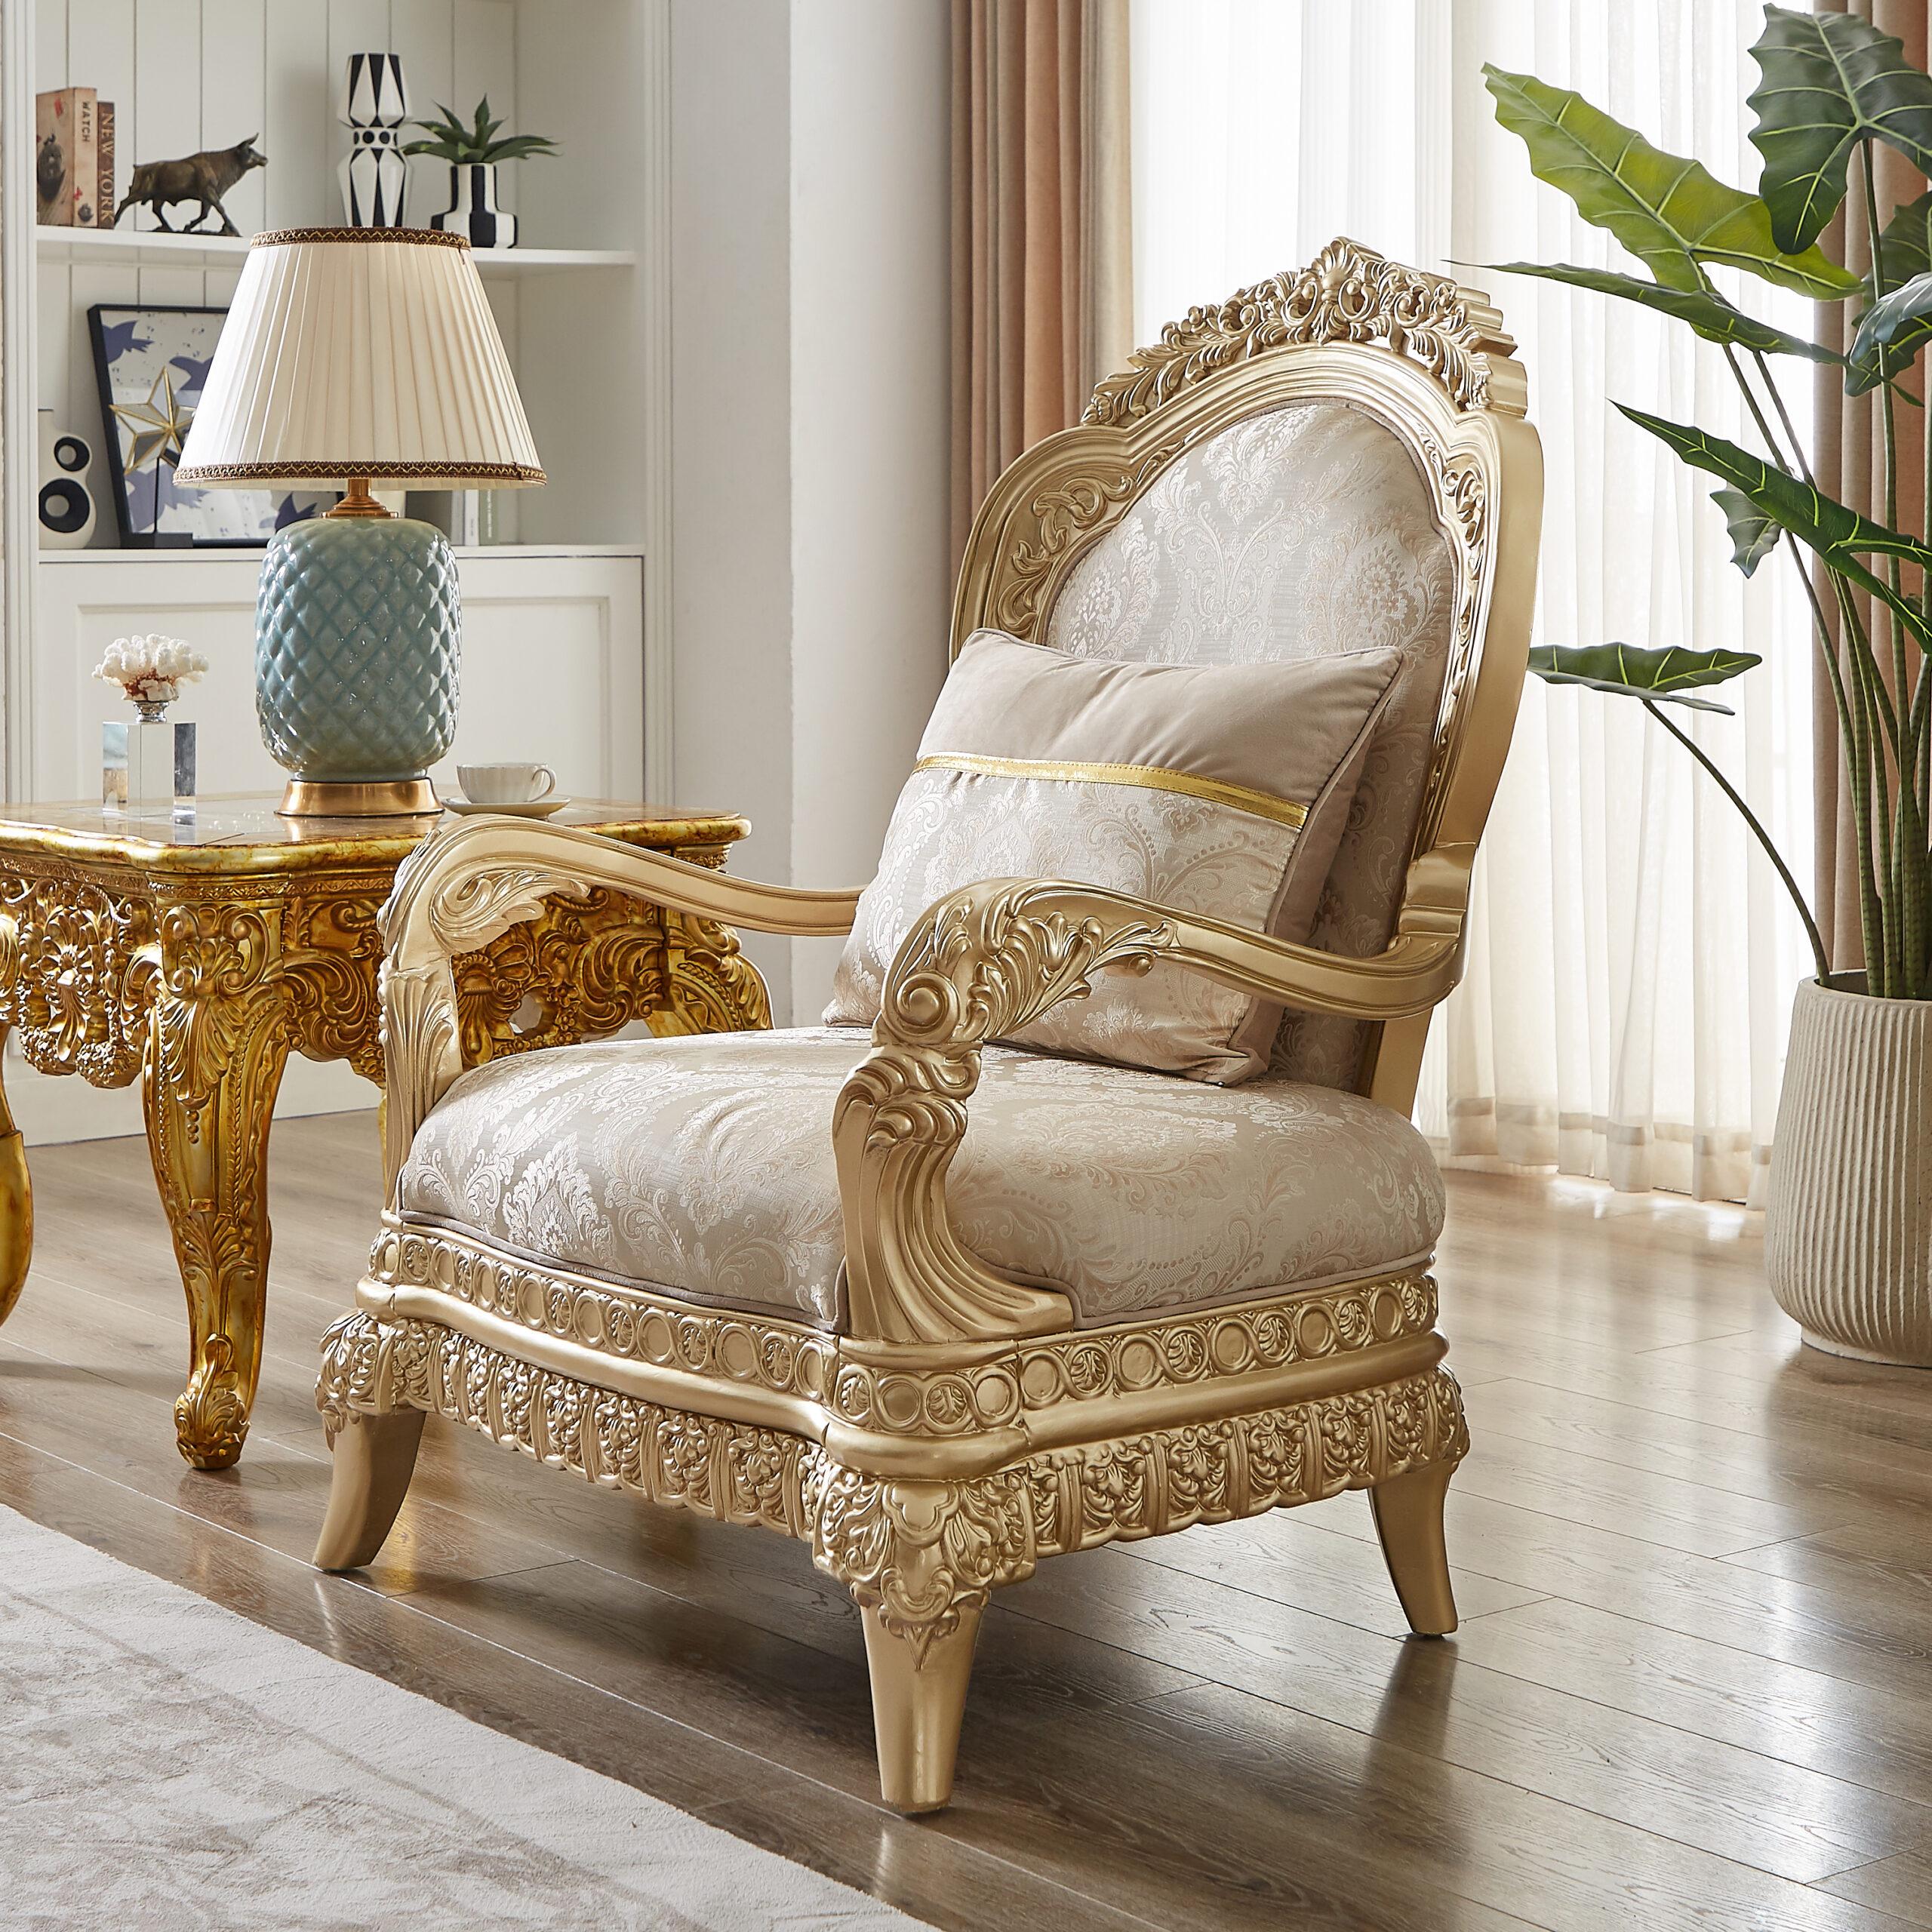 Classic, Traditional Chair HD-9023 Chair HD-C9023 HD-C9023 in Gold, Beige Fabric